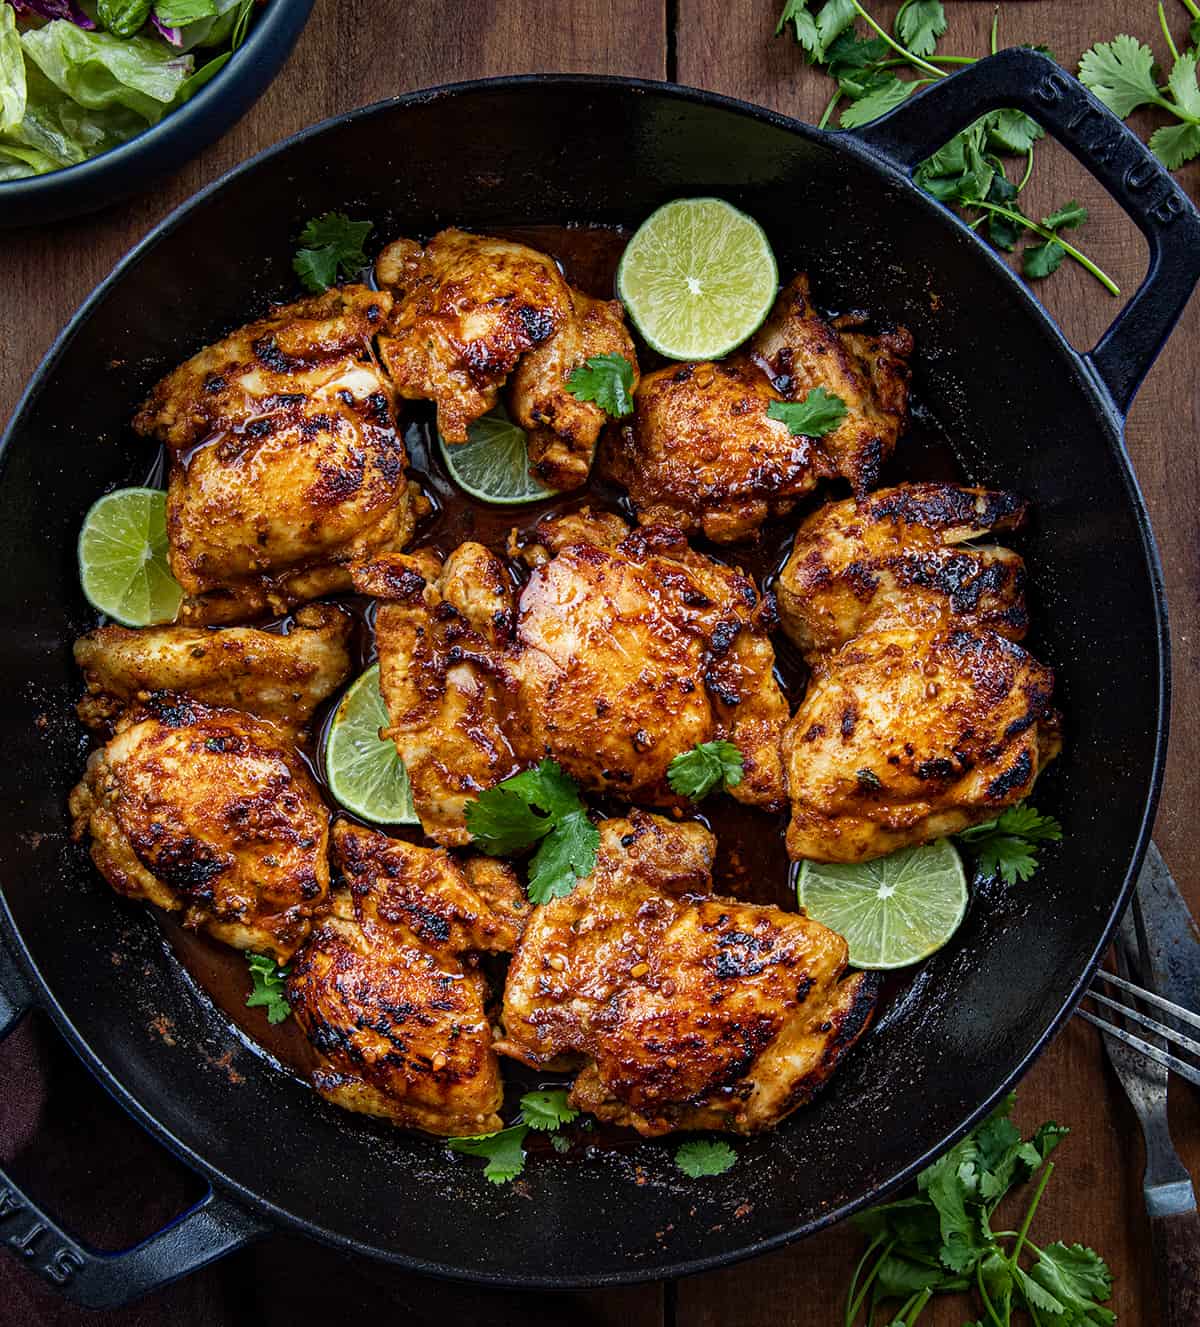 Skillet of Chili Lime Chicken on a wooden table from overhead. 